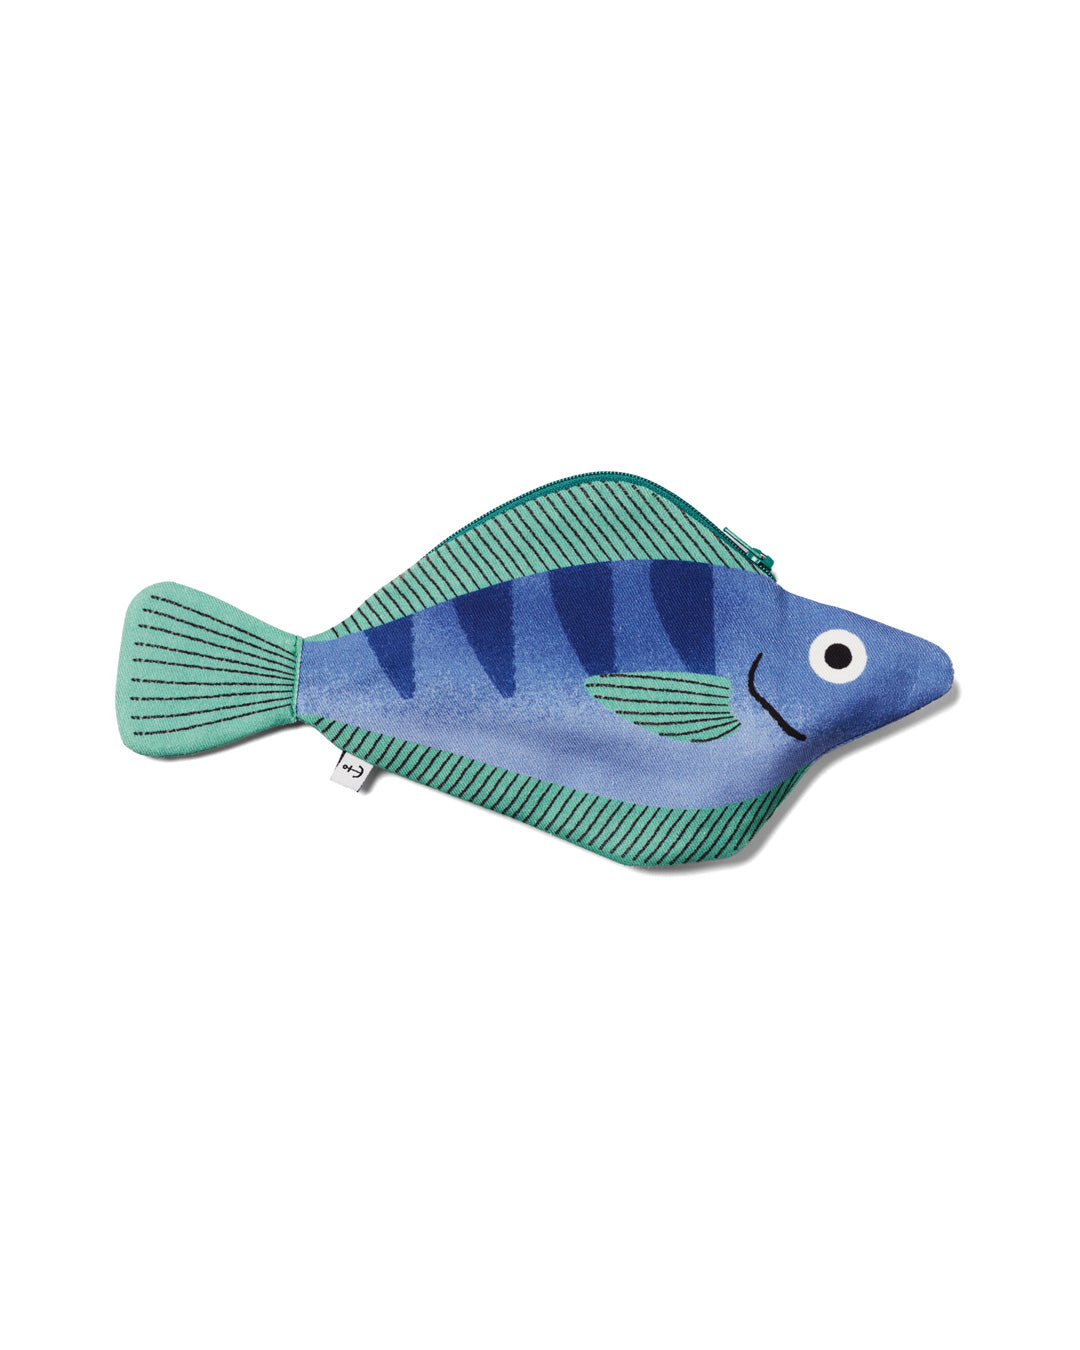 Pouting keychain case pencil fish textile fun handmade handcrafted